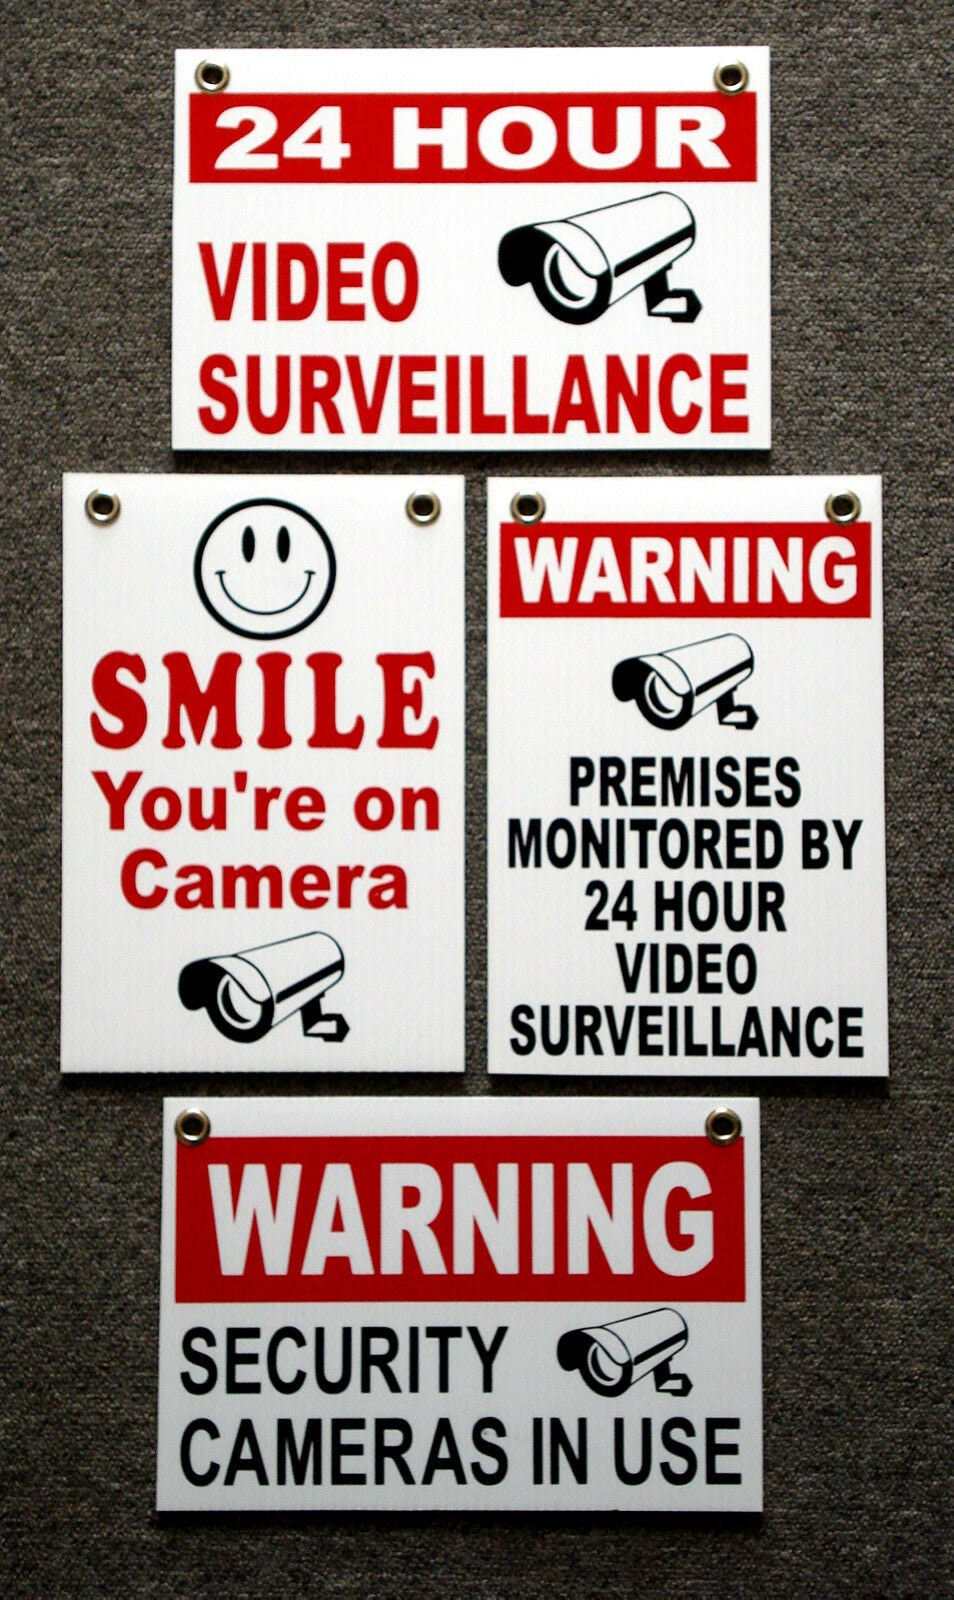 5 Security Video Surveillance Warning  24Hr  Signs 8x12 Spanish English w/Stakes 